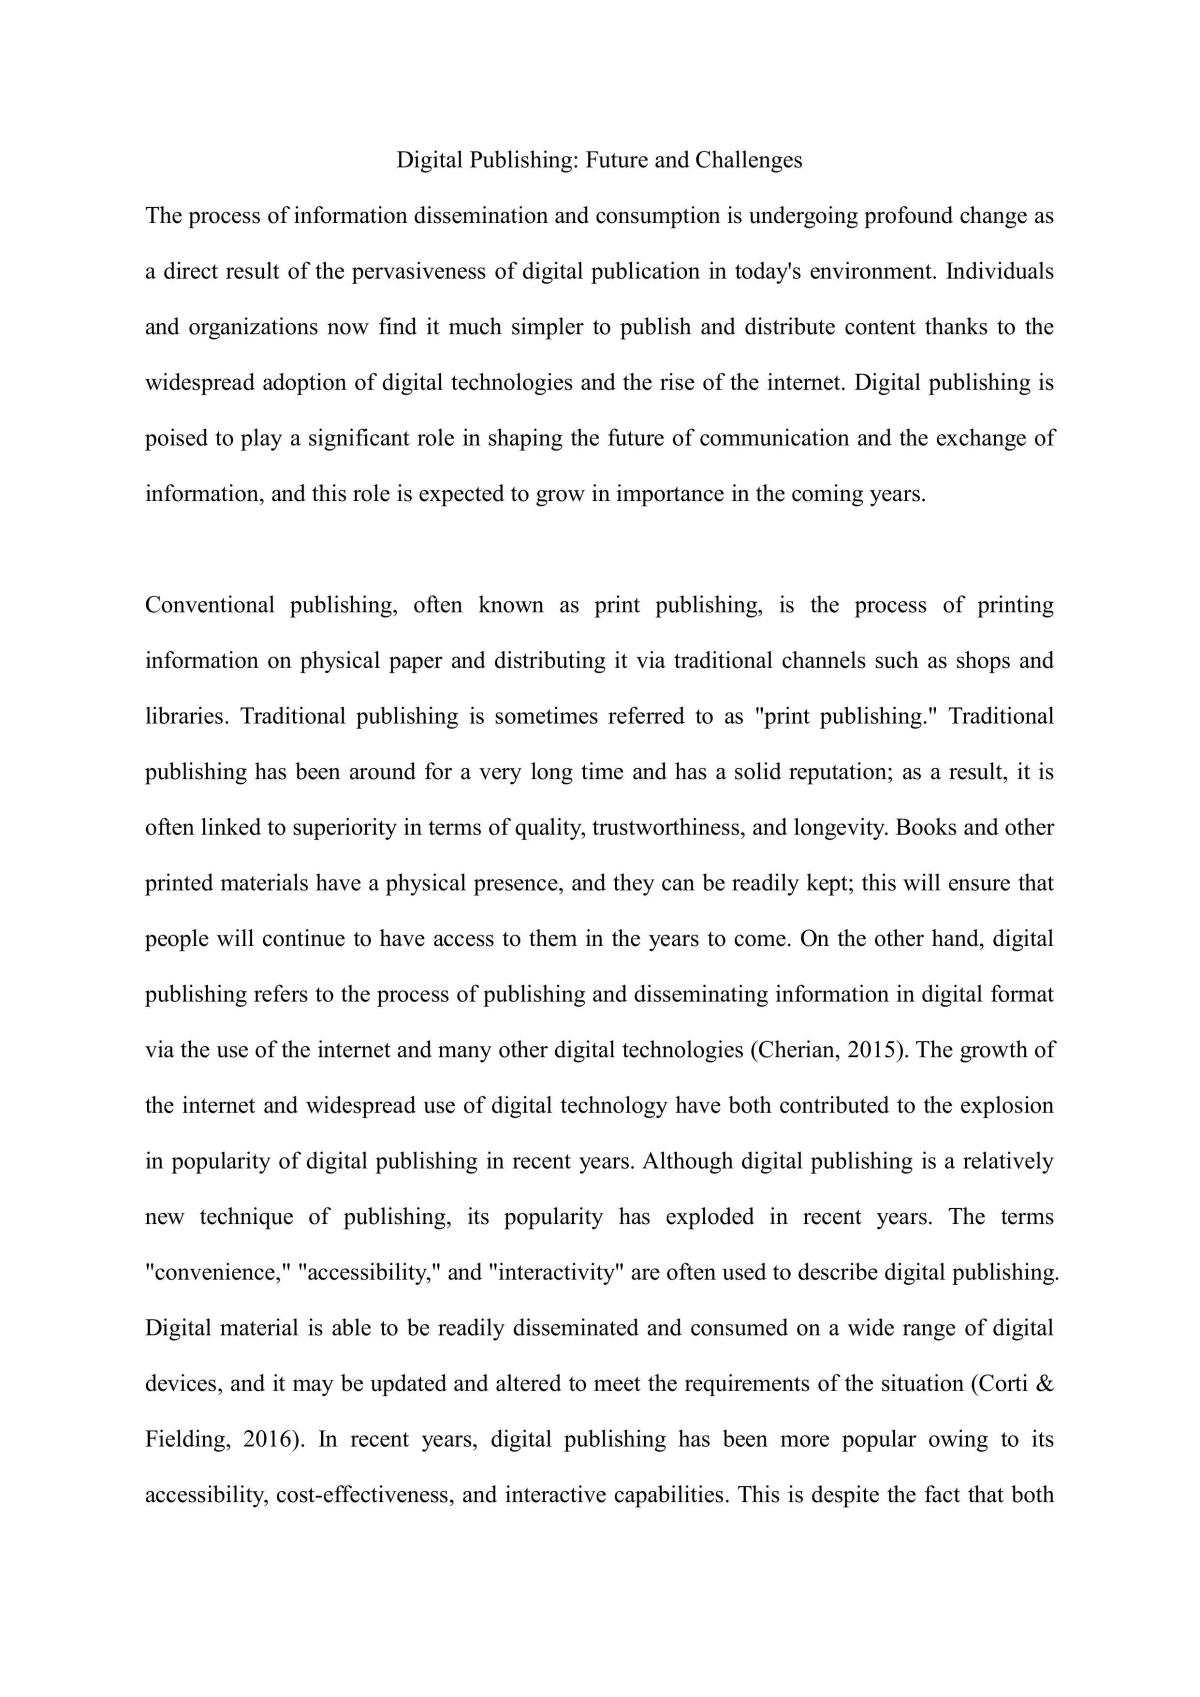 Digital Publishing: Future and Challenges - Page 1